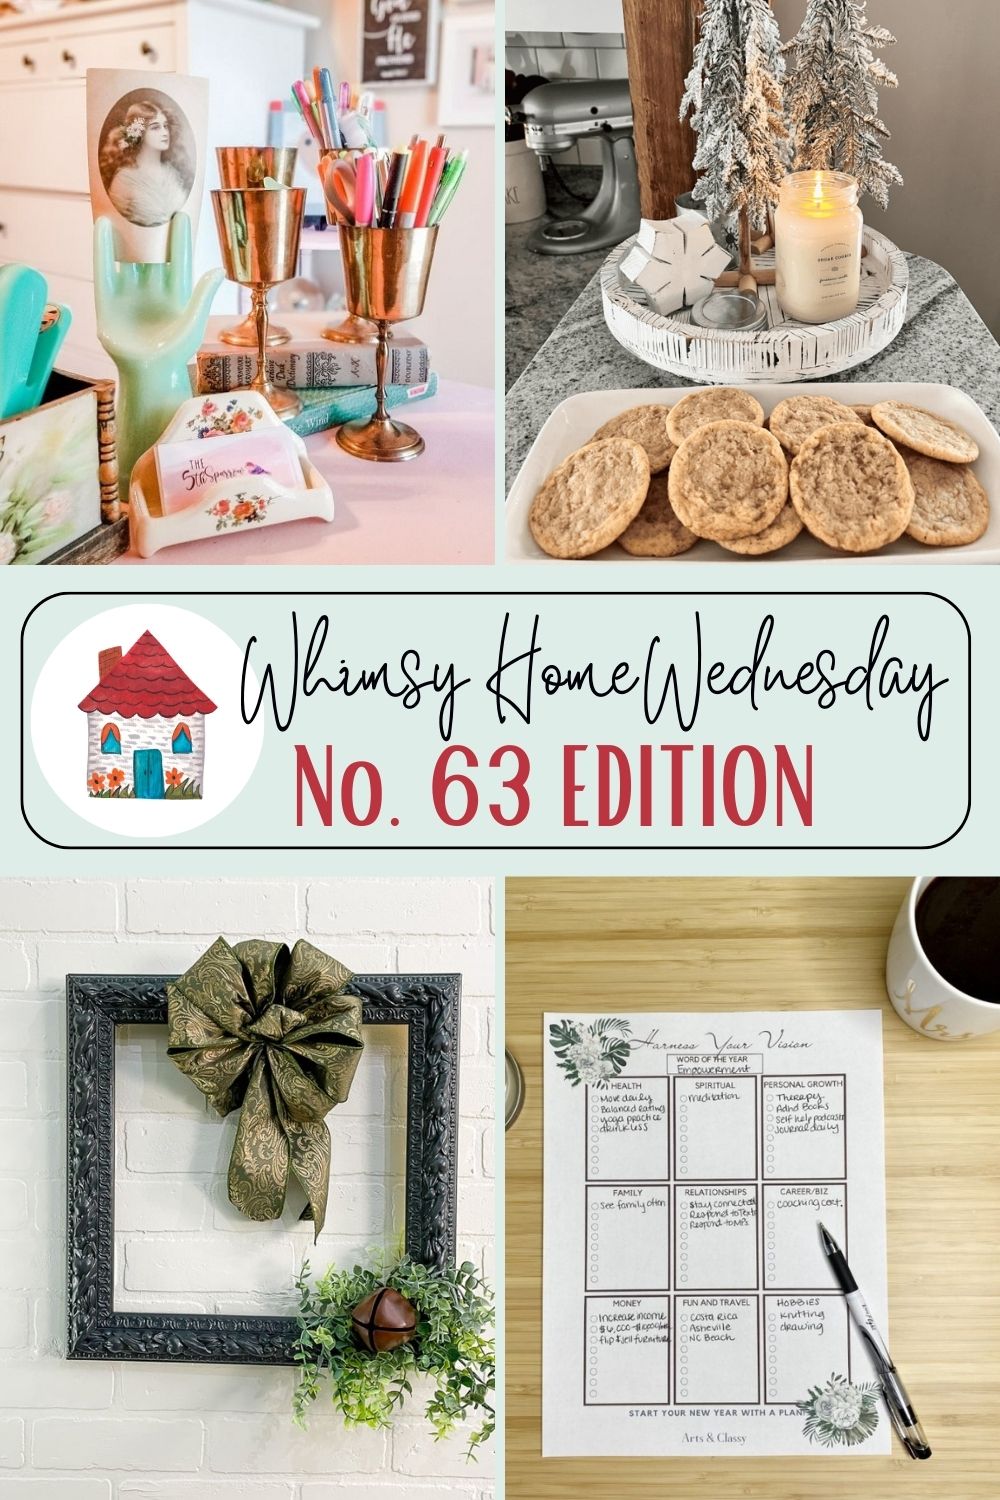 Join us on Whimsy Home Wednesday Blog Link Party No. 63 and see host projects, the features from the previous week and link up your posts!